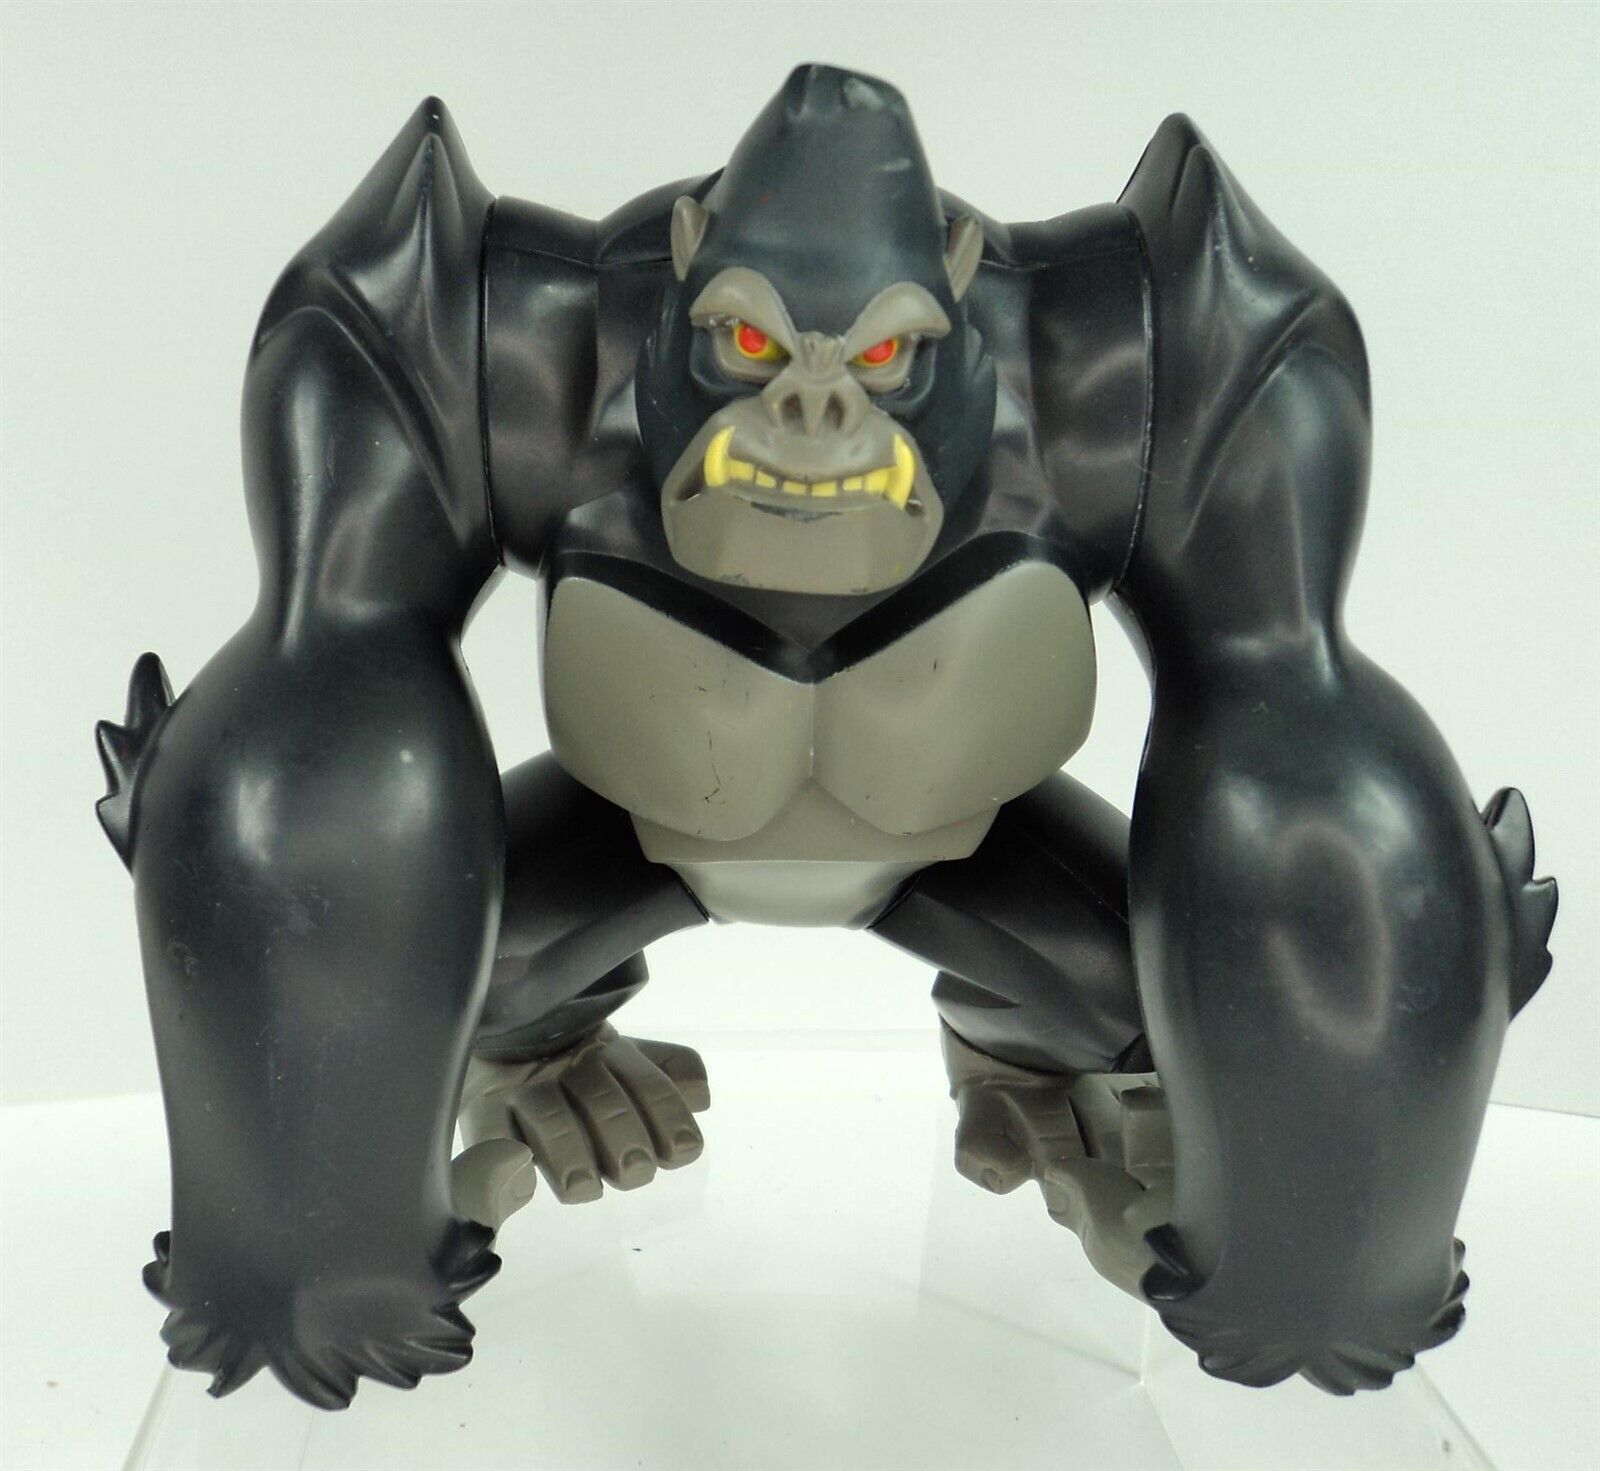 Primary image for Batman Brave and the Bold Gorilla Grodd 5" Action Figure